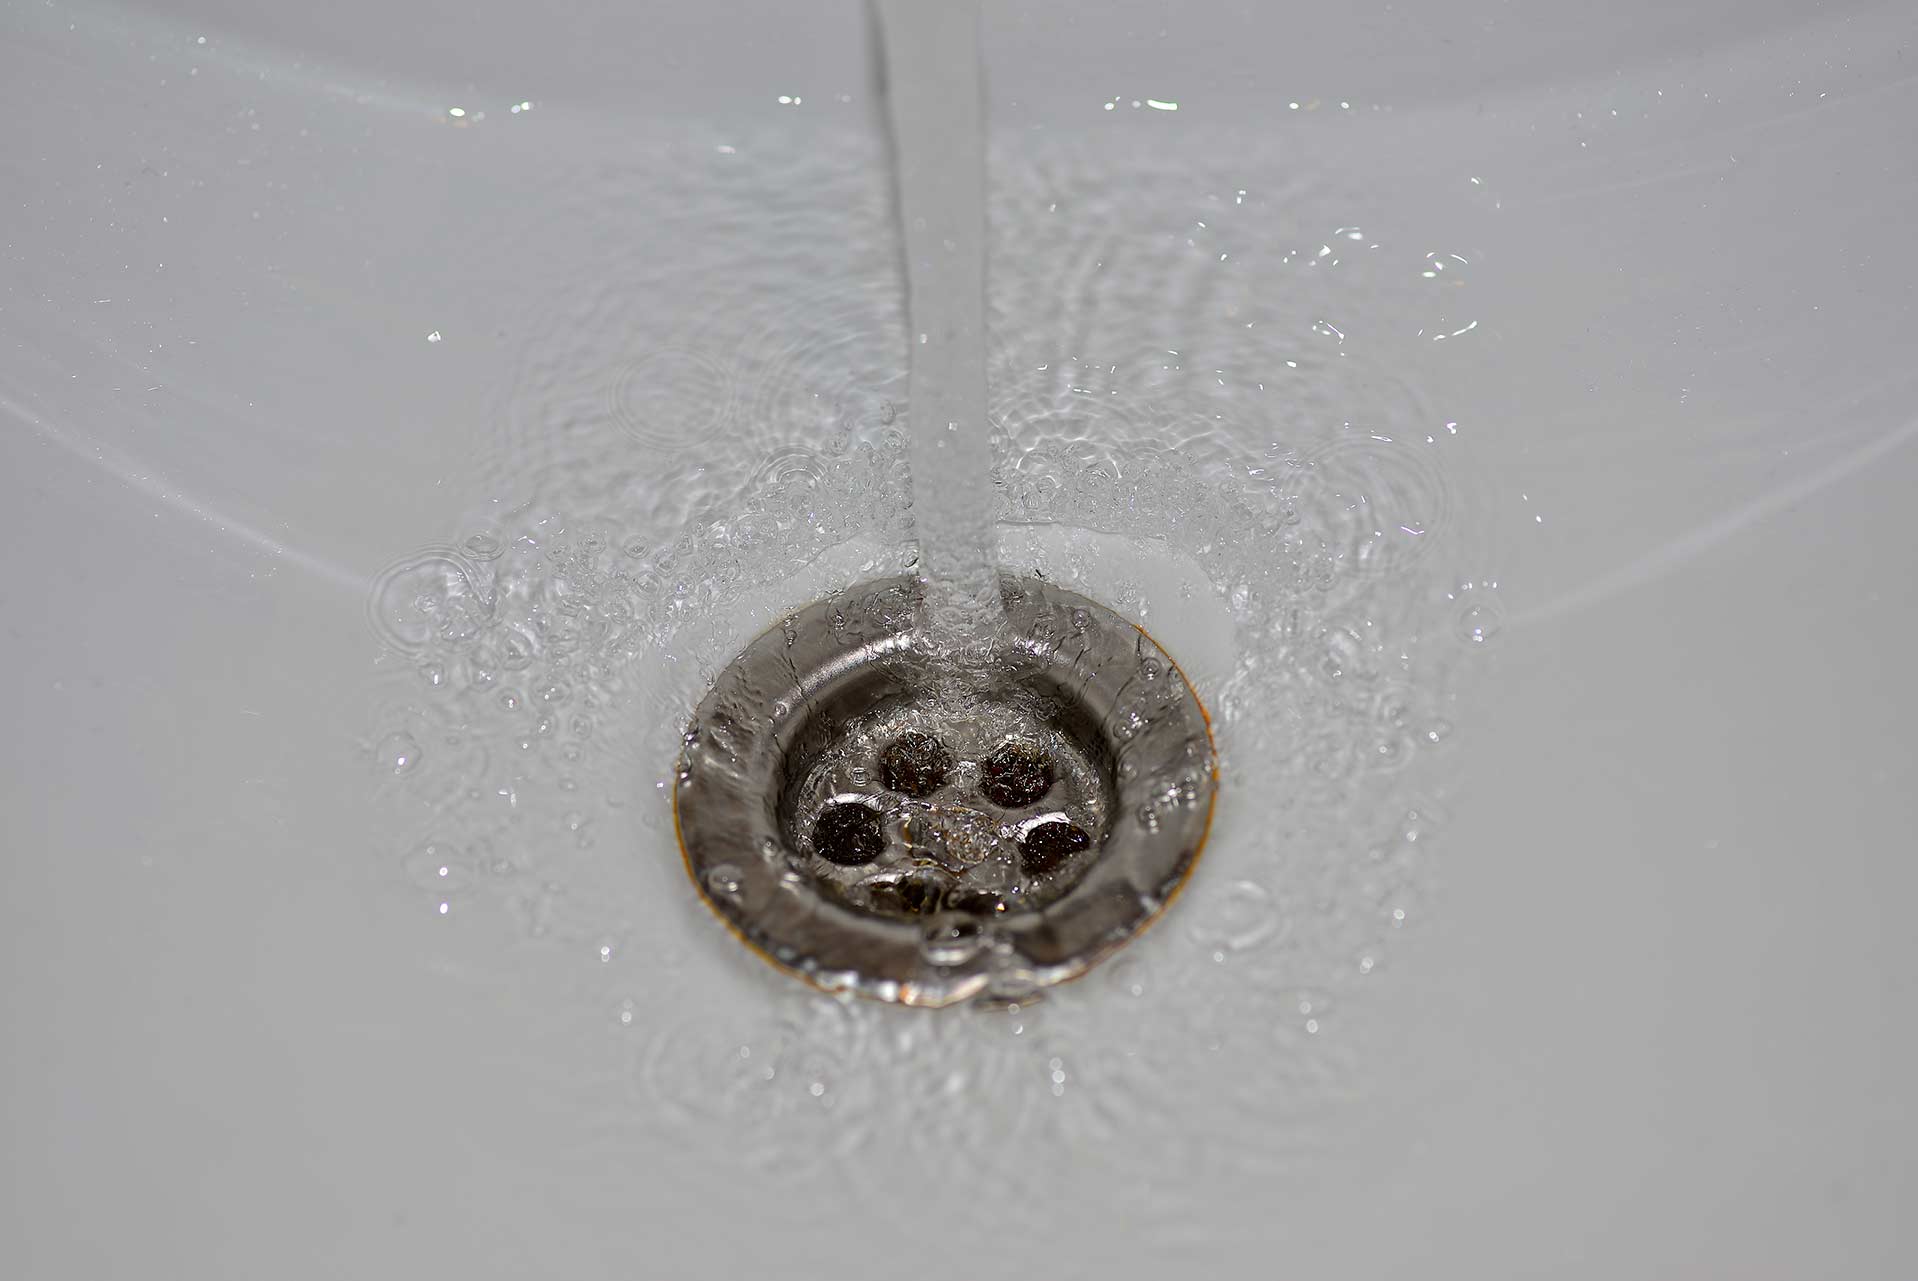 A2B Drains provides services to unblock blocked sinks and drains for properties in Burnham.